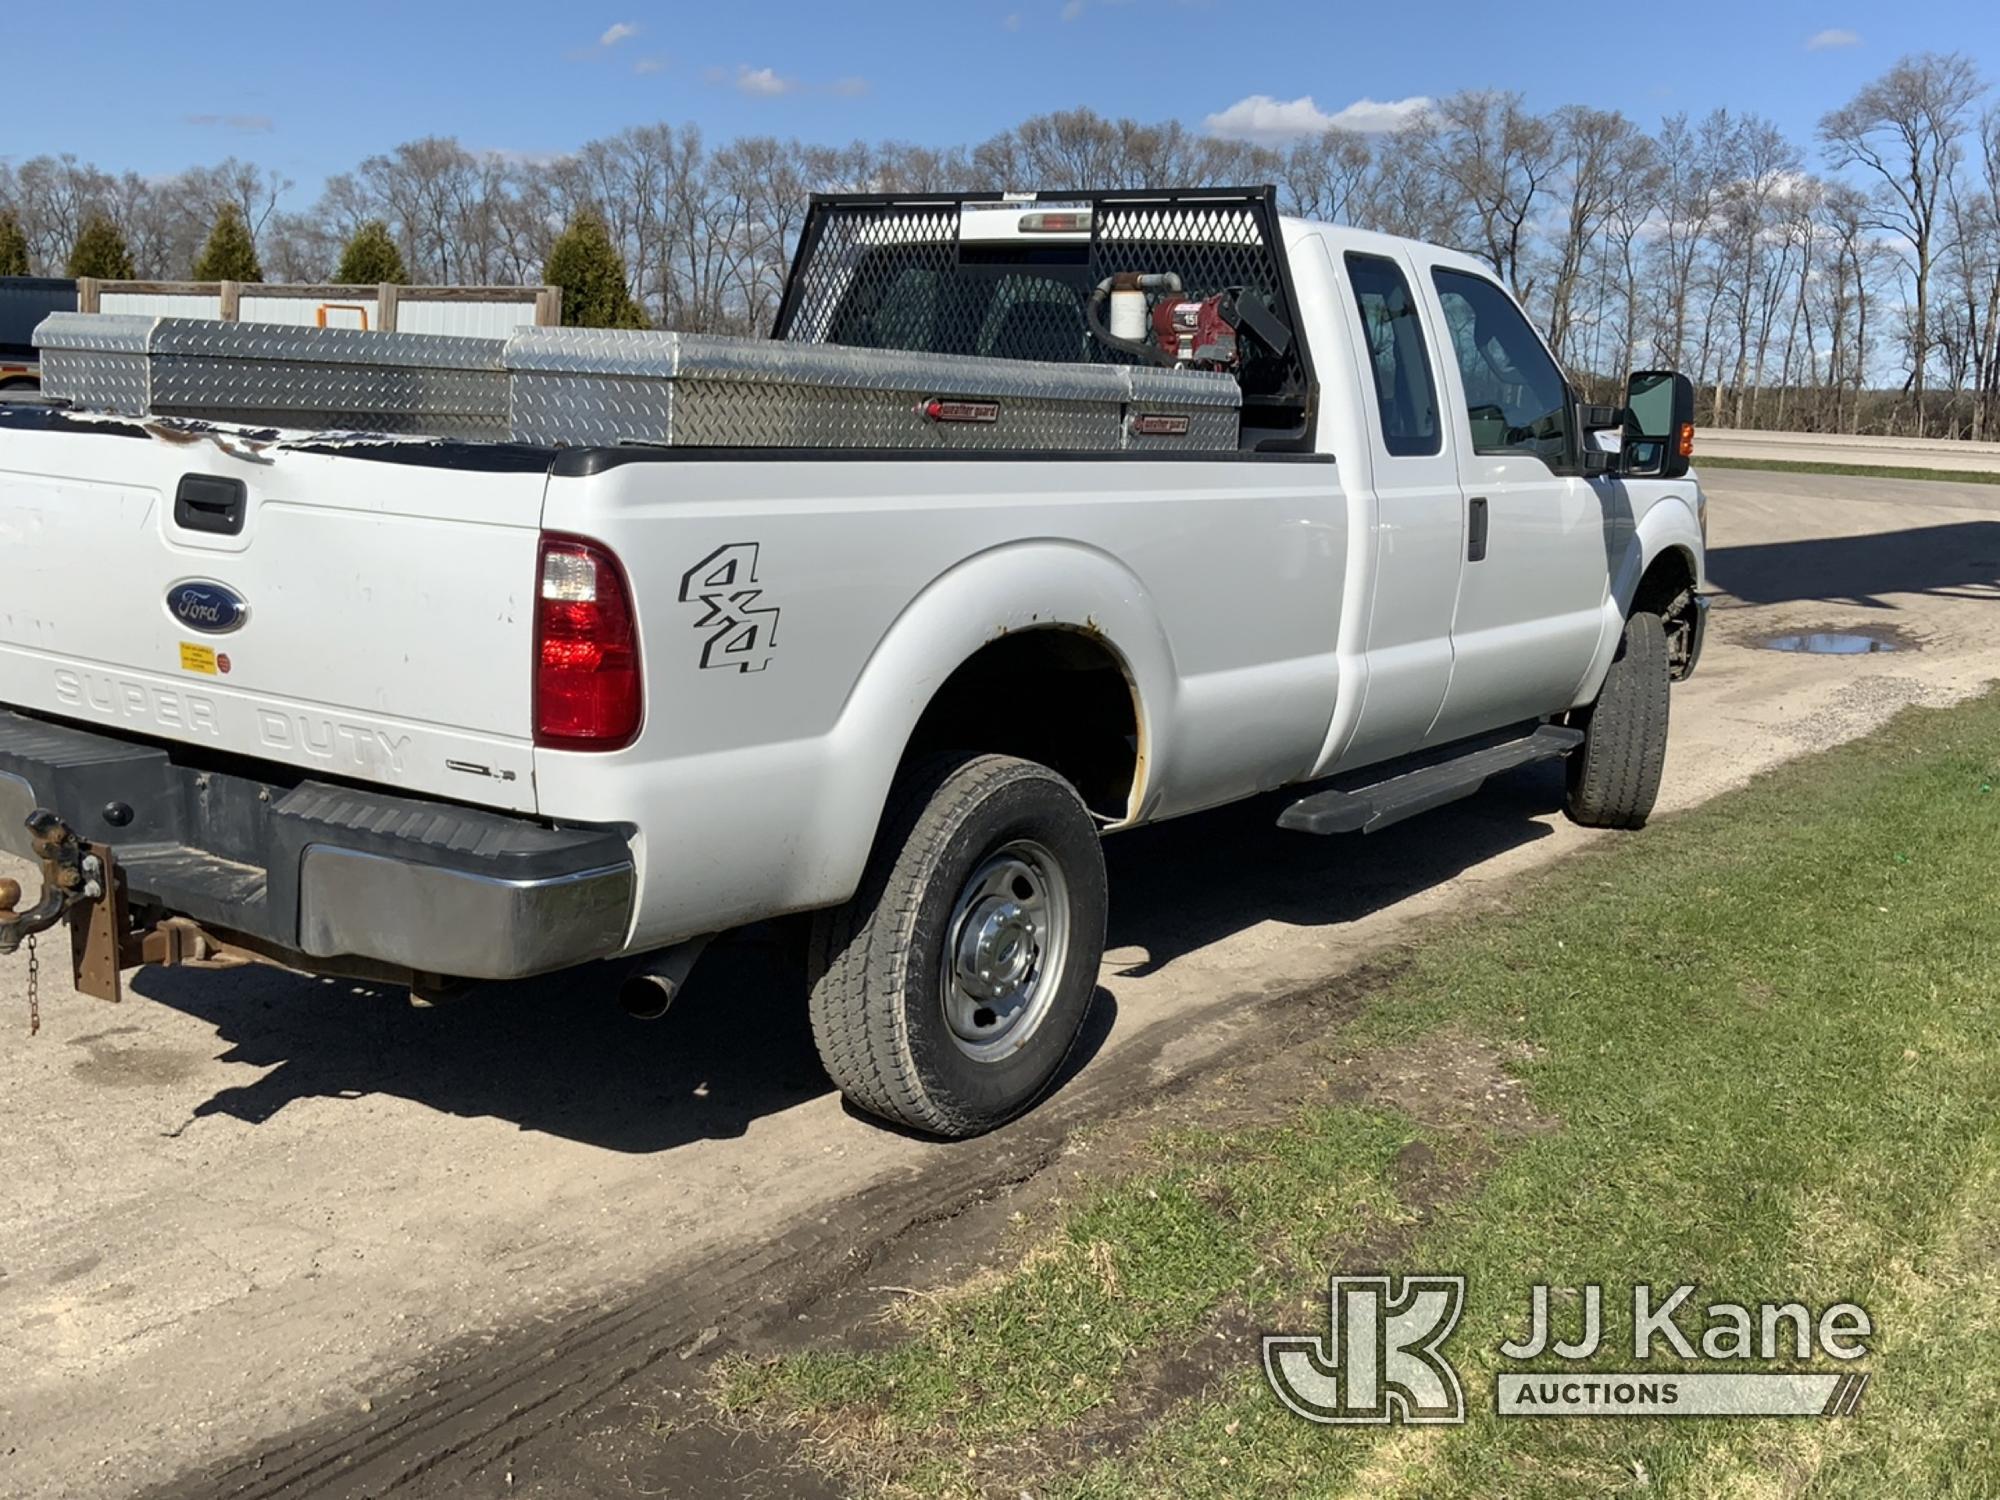 (South Beloit, IL) 2015 Ford F250 4x4 Extended-Cab Pickup Truck Runs, Moves, Check Engine Light On